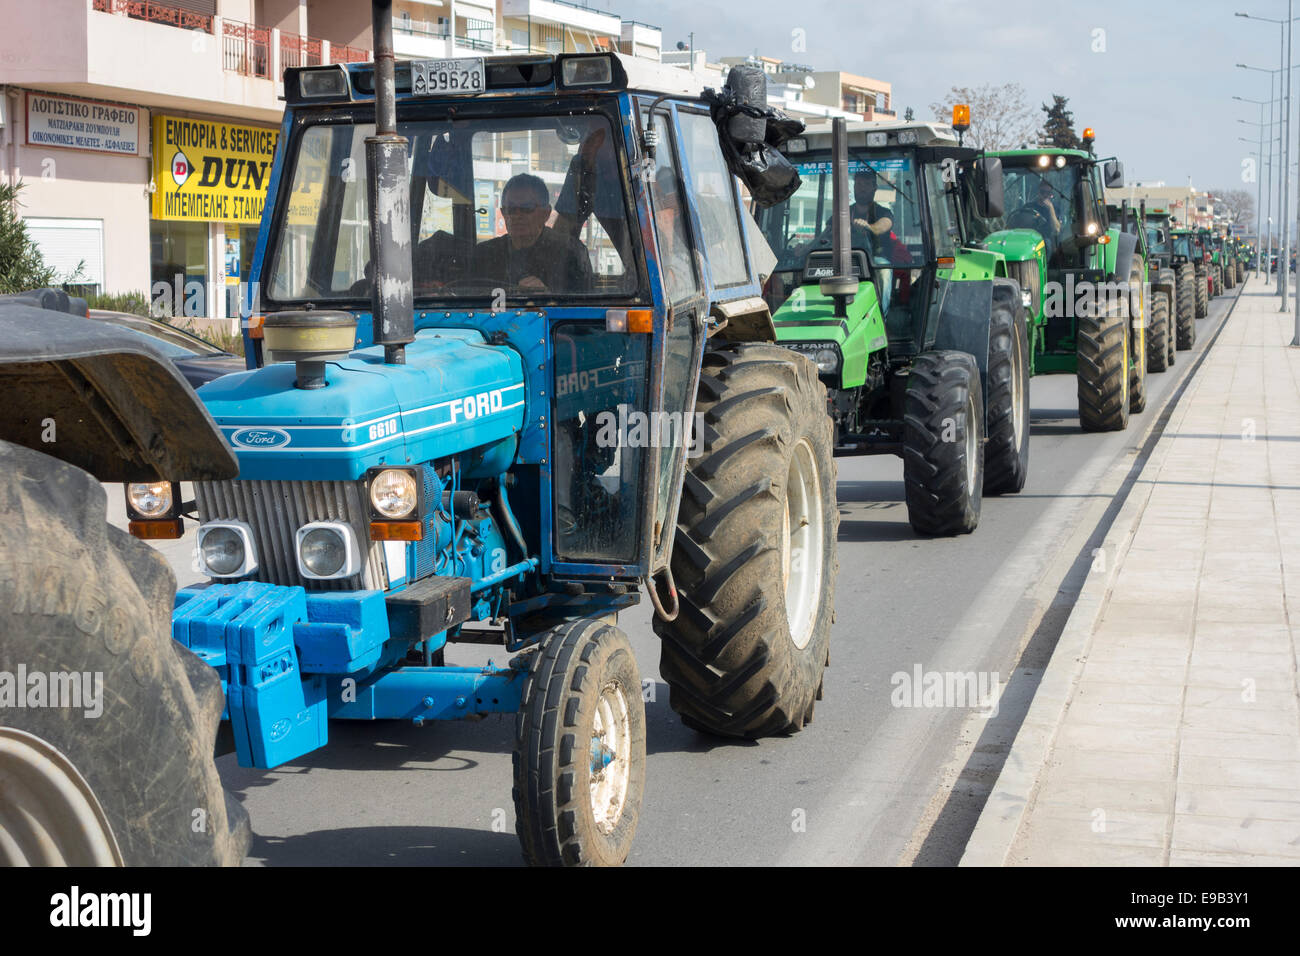 ALEXANDROUPOLIS, GREECE - FEB 18: Protest by farmers with their tractors on main road in Alexandroupolis for fairer tax system Stock Photo